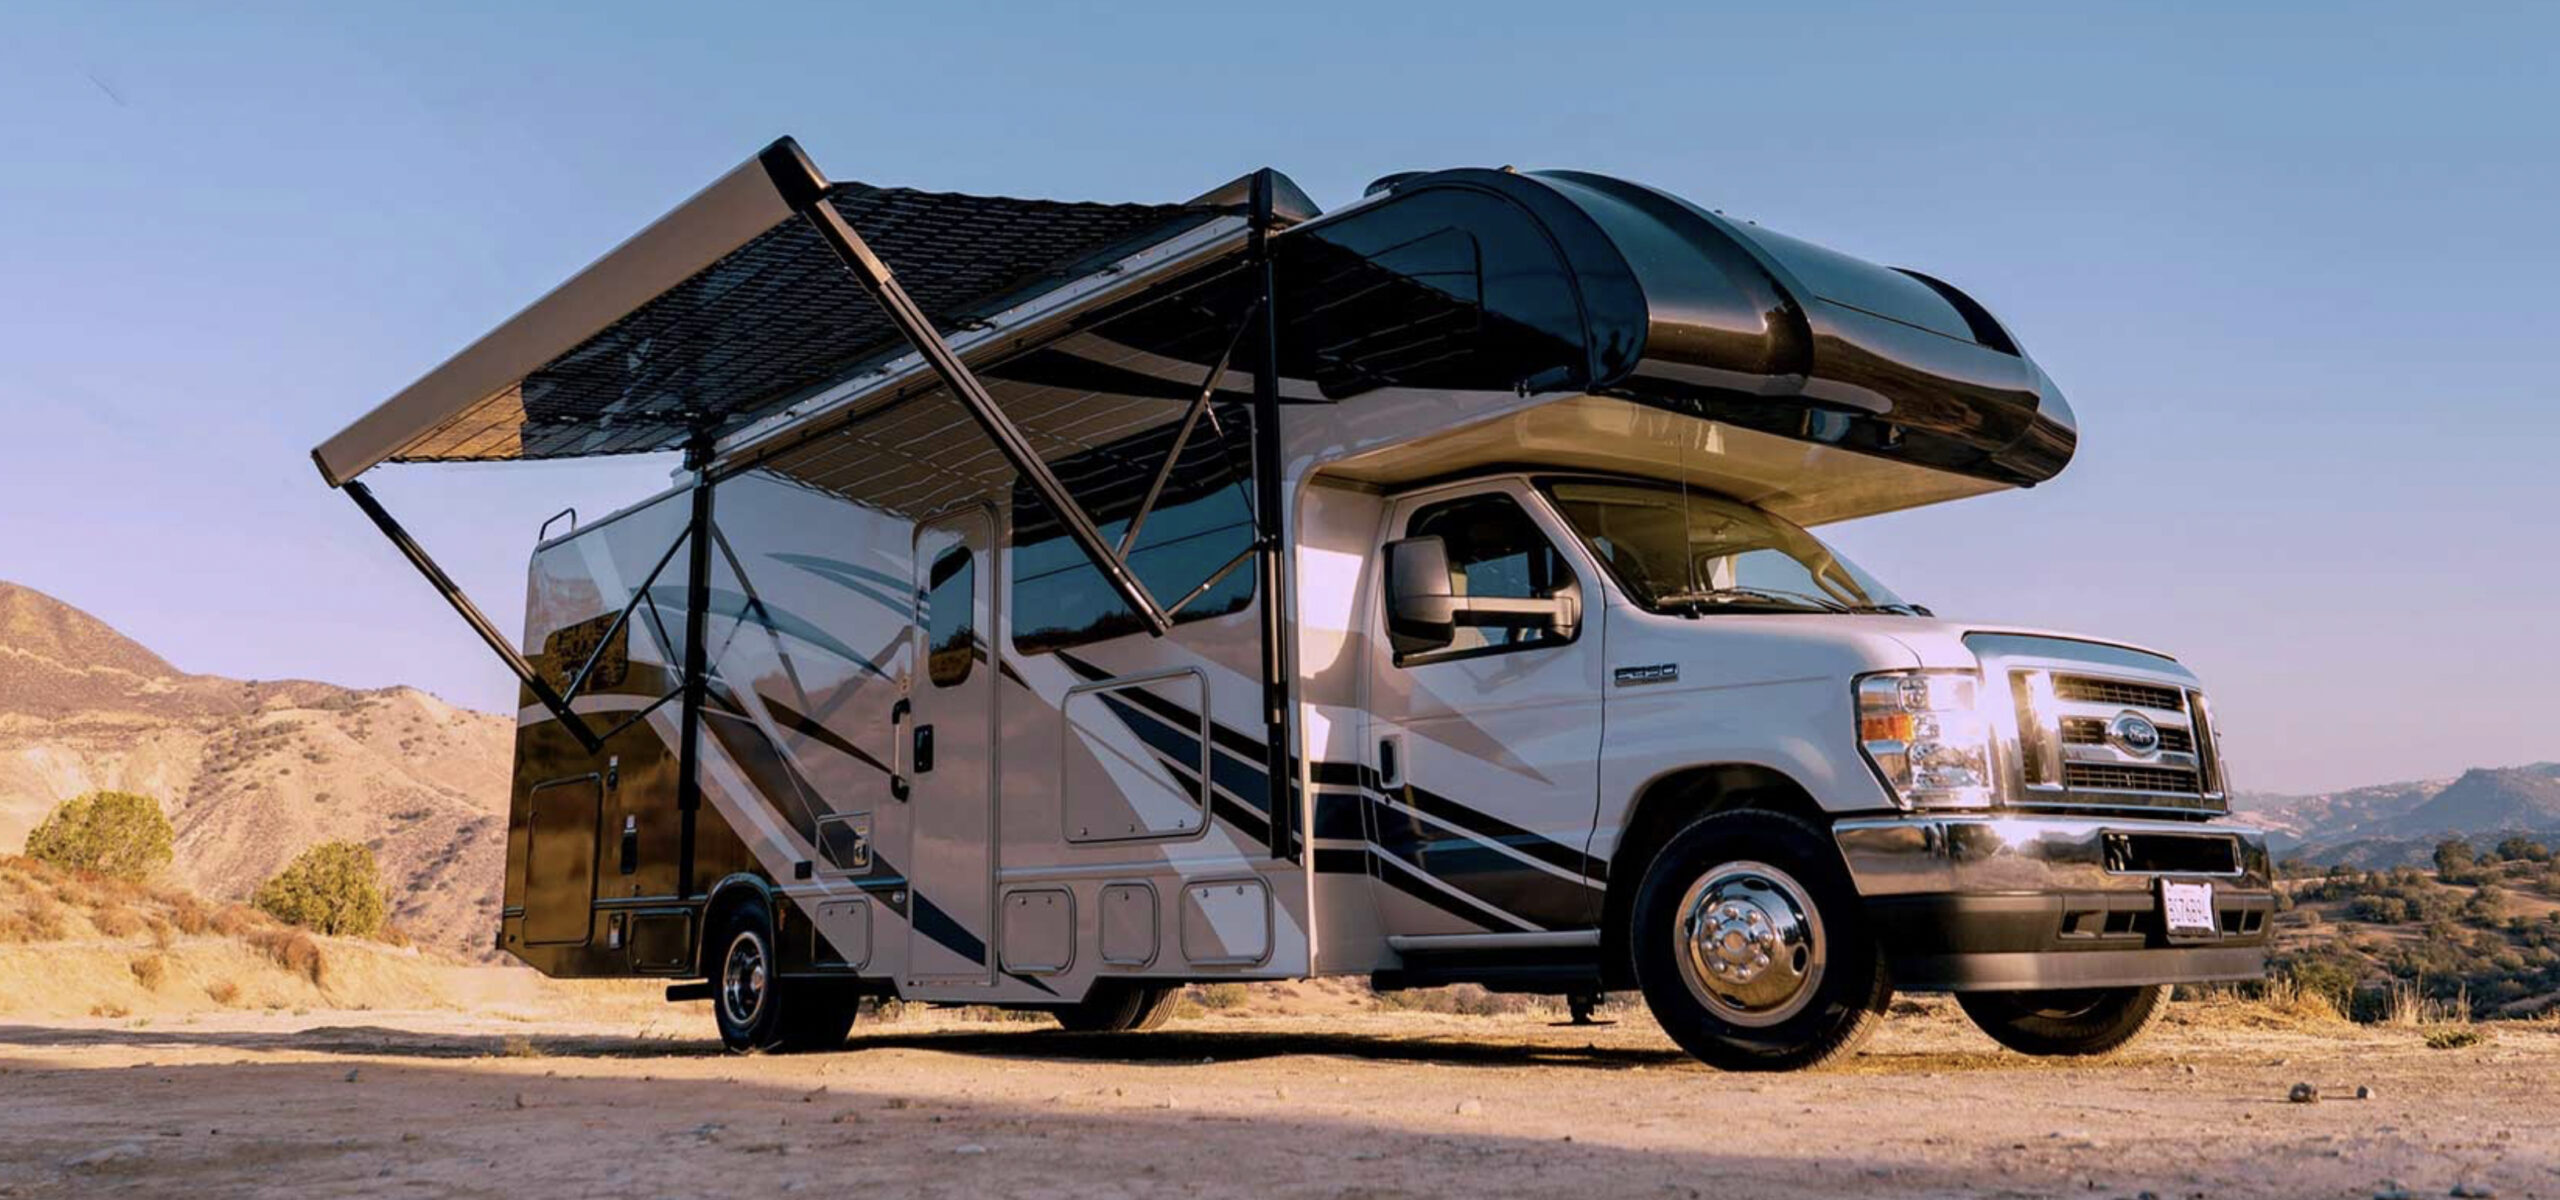 Have You Seen the New Solar RV Awning?